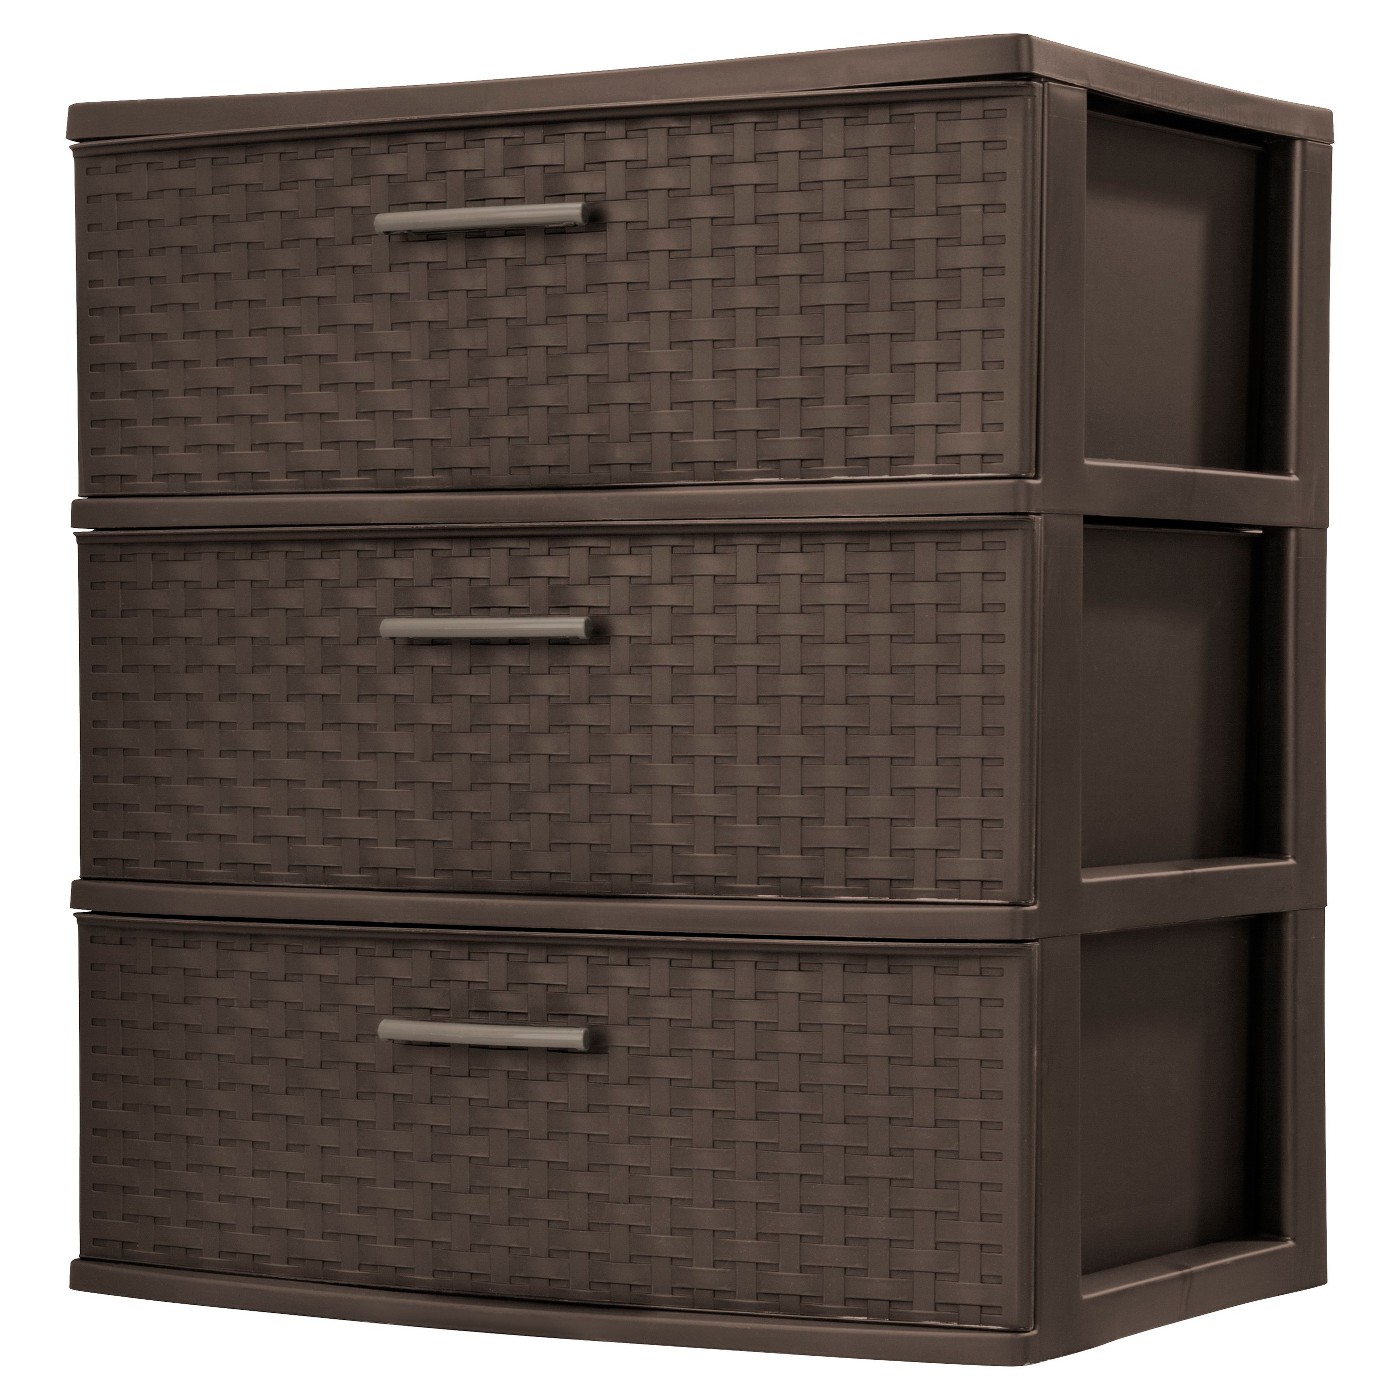 SteriliteÂ® 3-Drawer Wide Tower - image 1 of 1